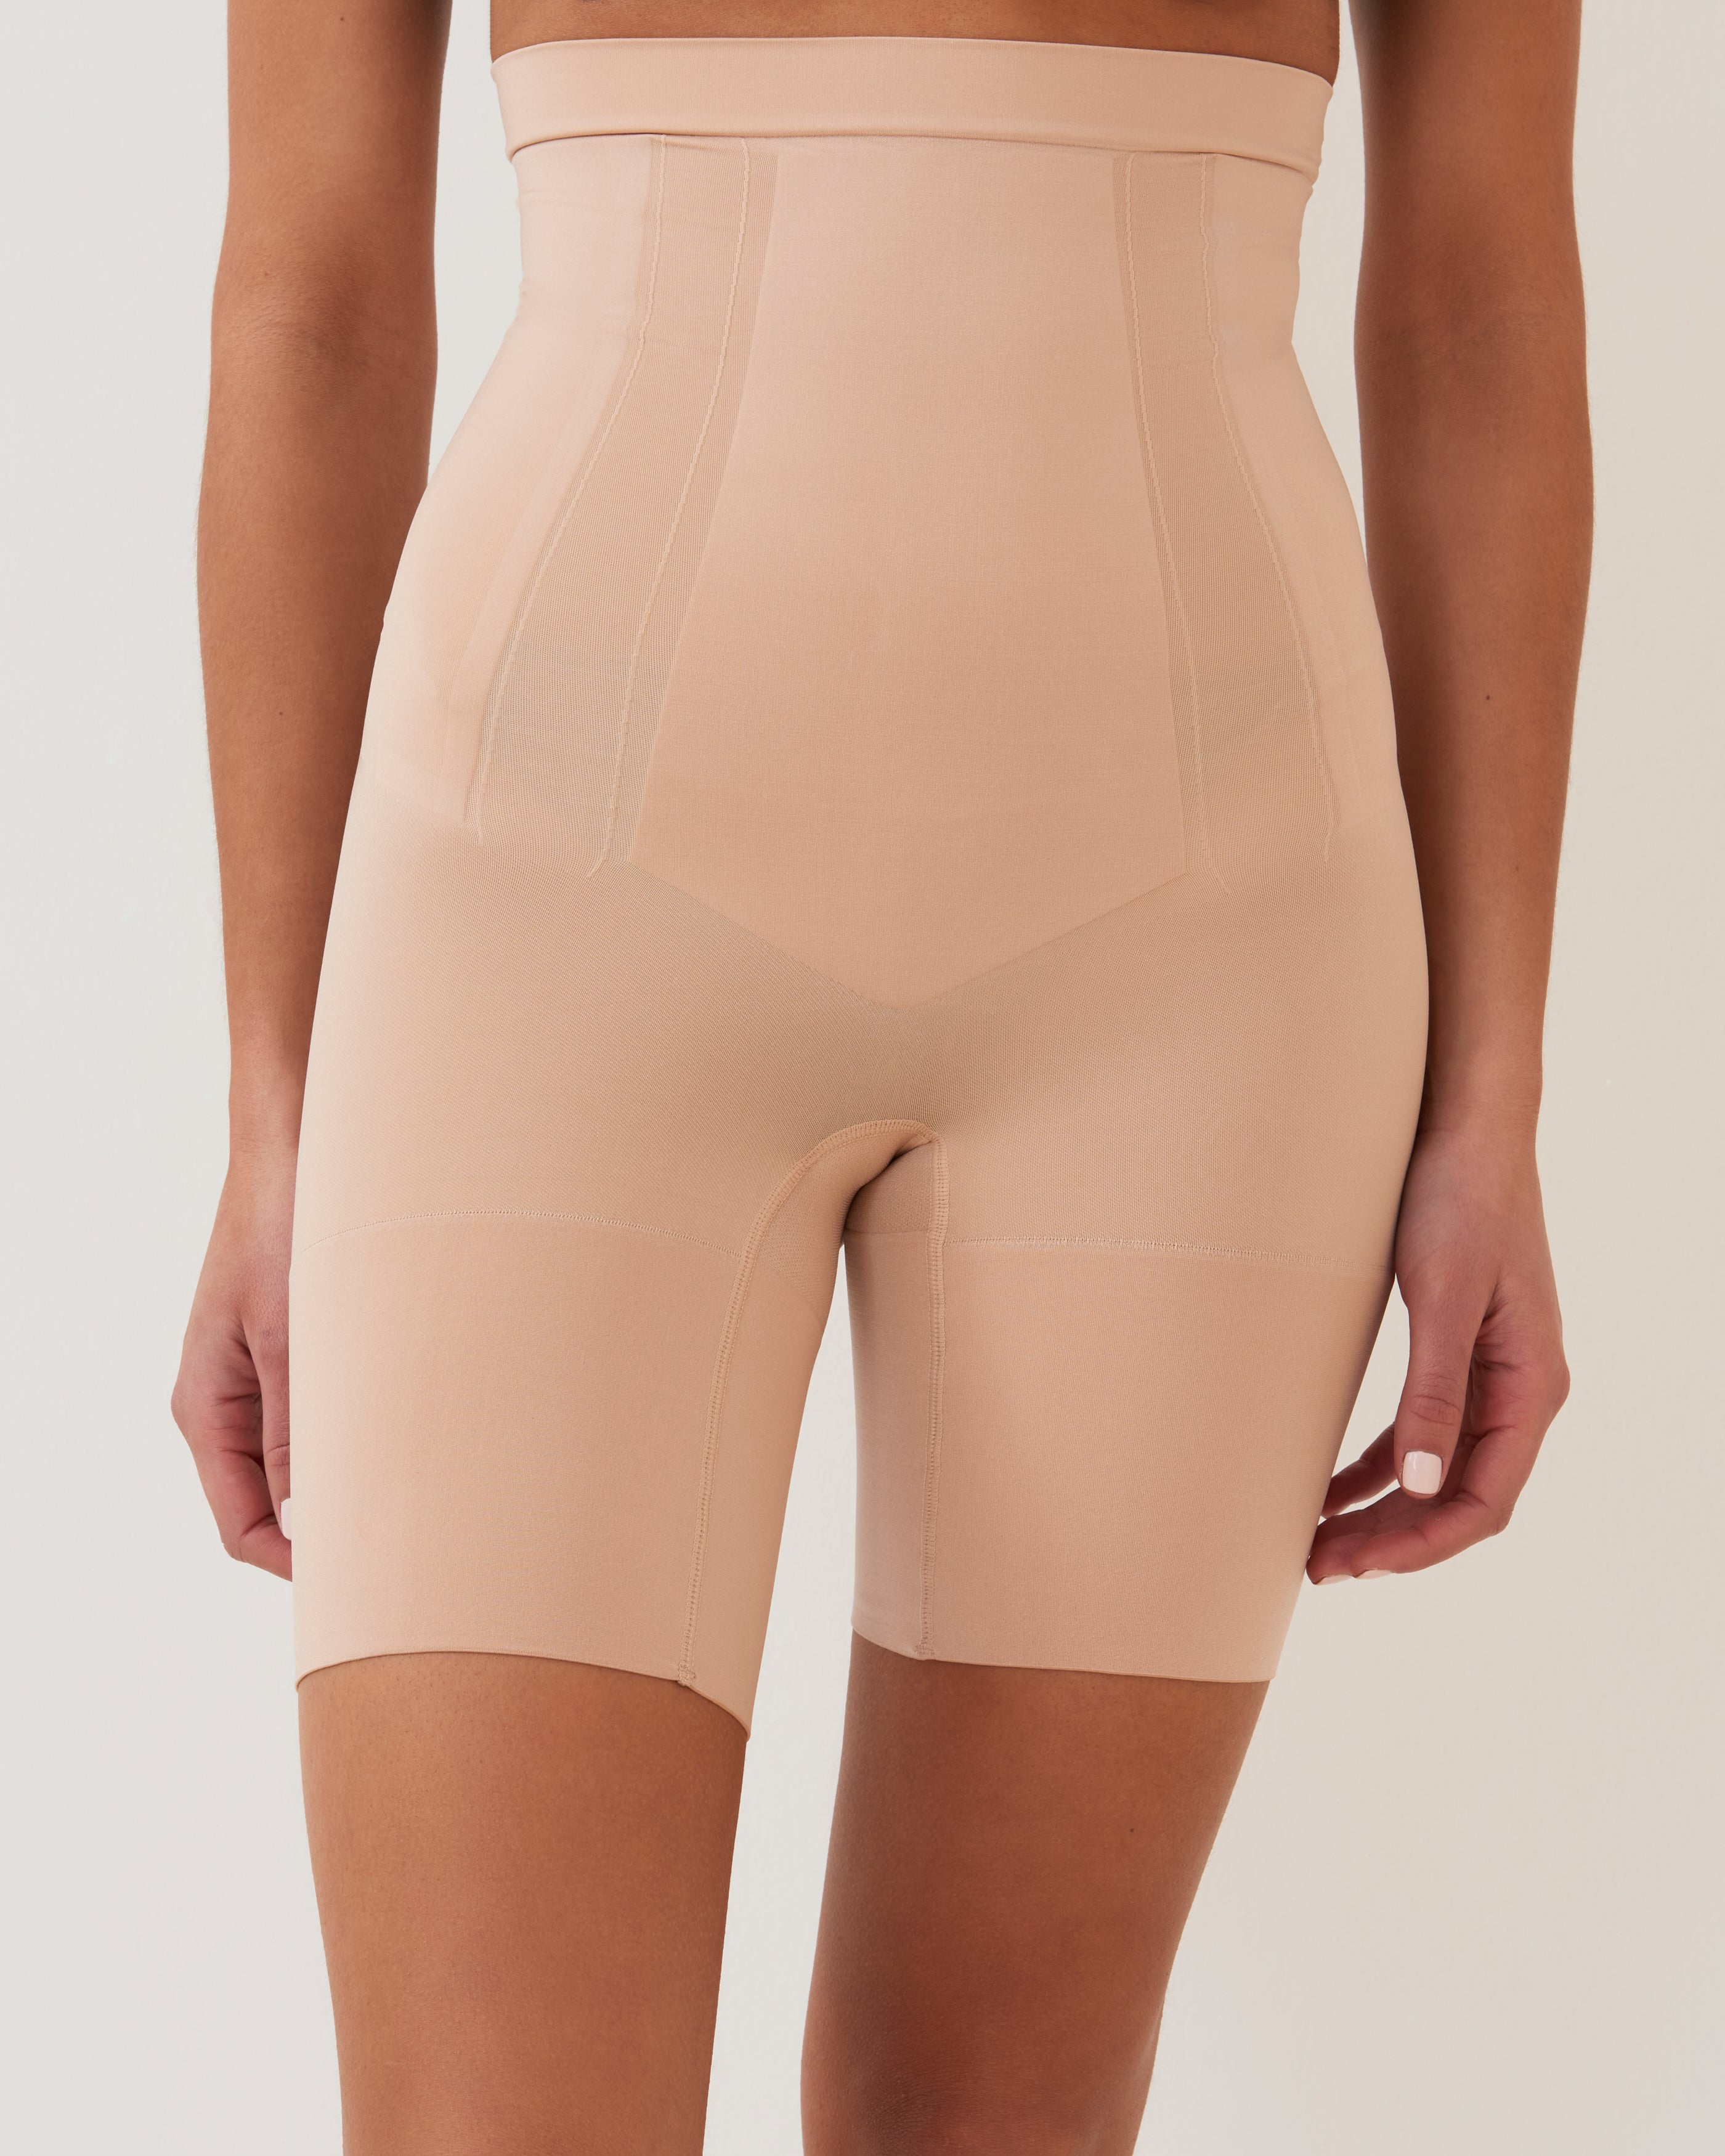 Nude High-waisted Slimming Girdle by SPANX